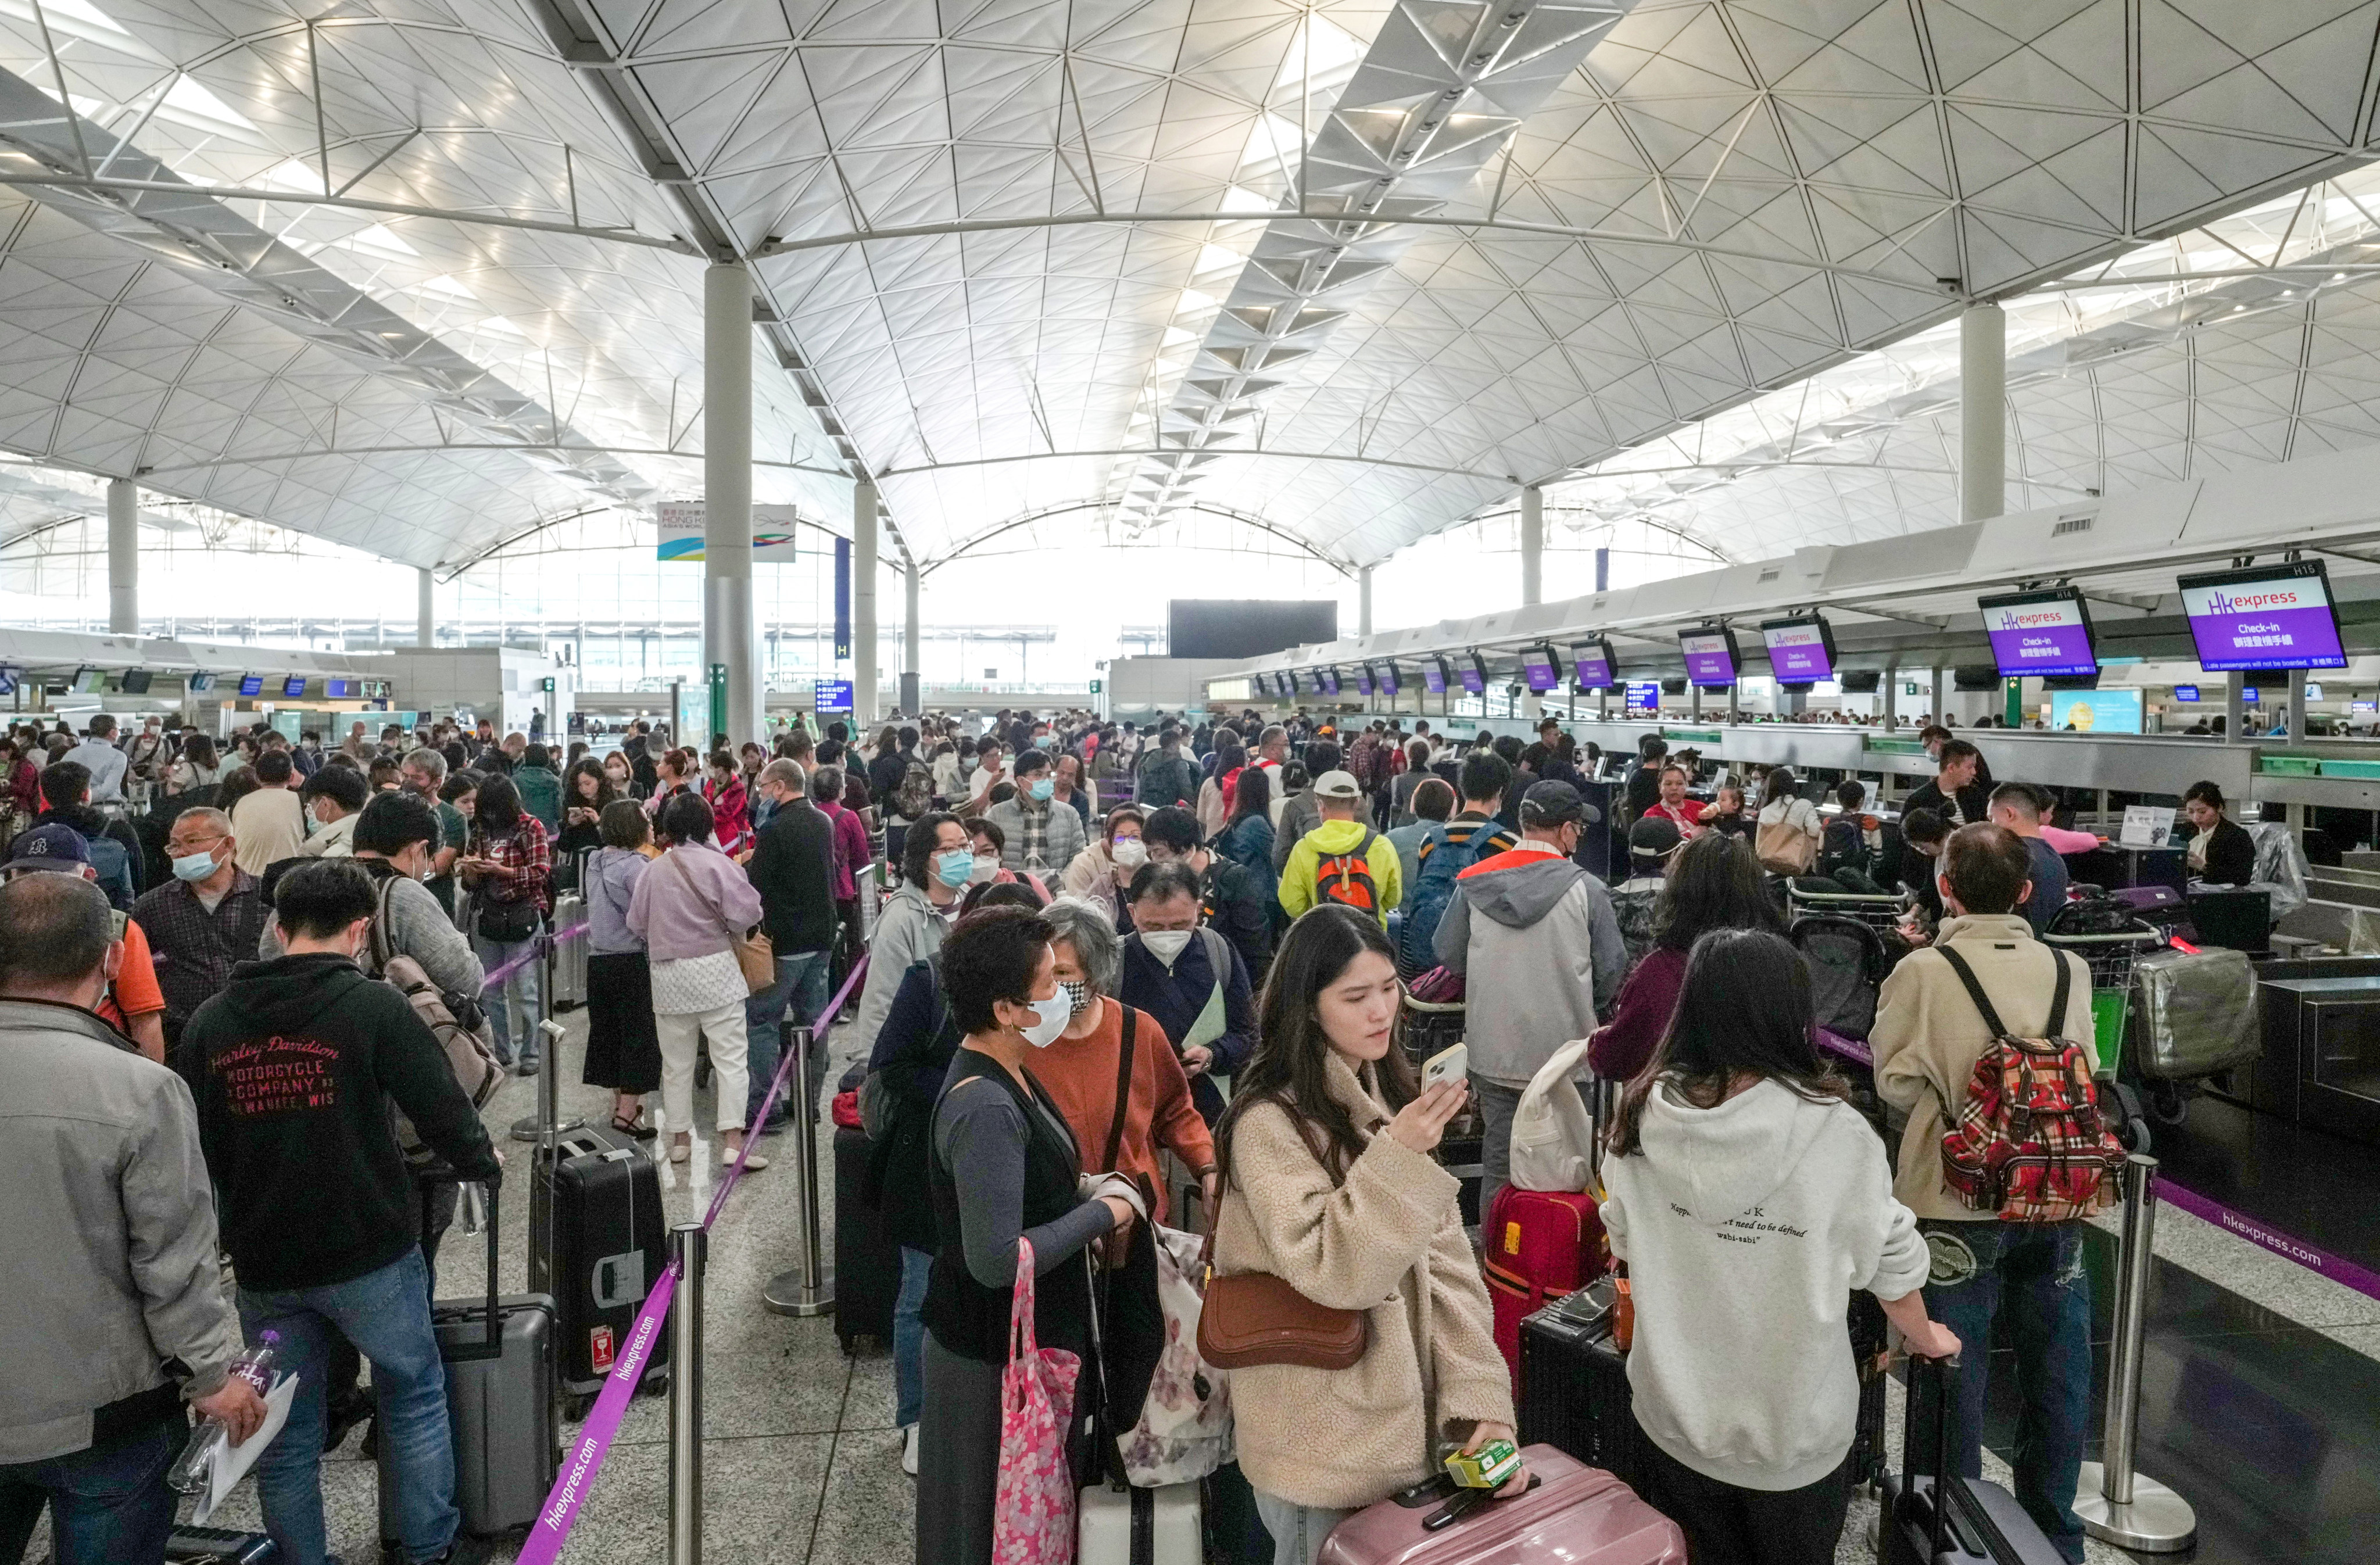 The departure hall of Hong Kong’s airport is packed with passengers whose flights are delayed. Photo: Sam Tsang